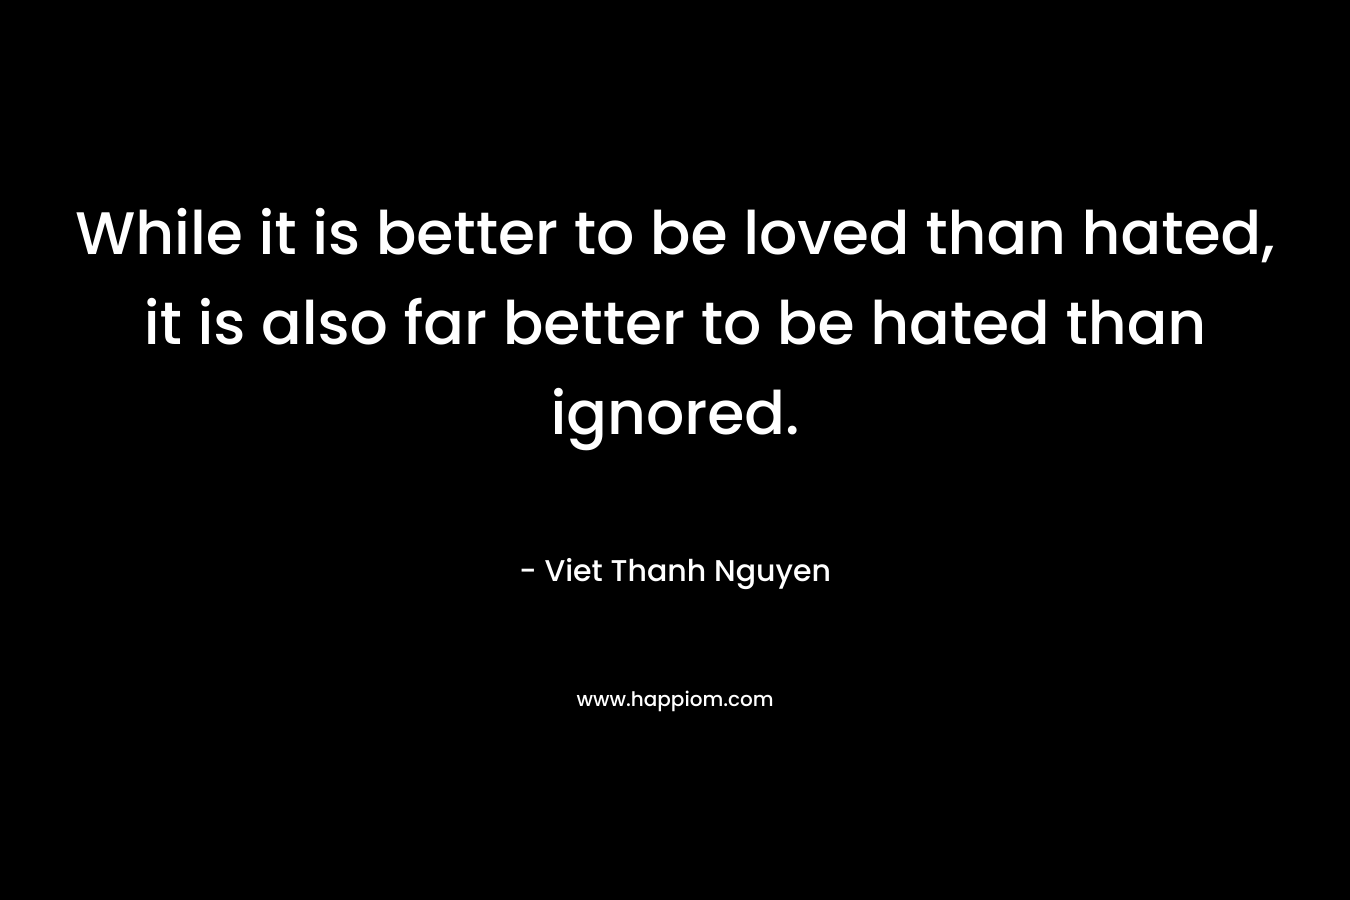 While it is better to be loved than hated, it is also far better to be hated than ignored. – Viet Thanh Nguyen